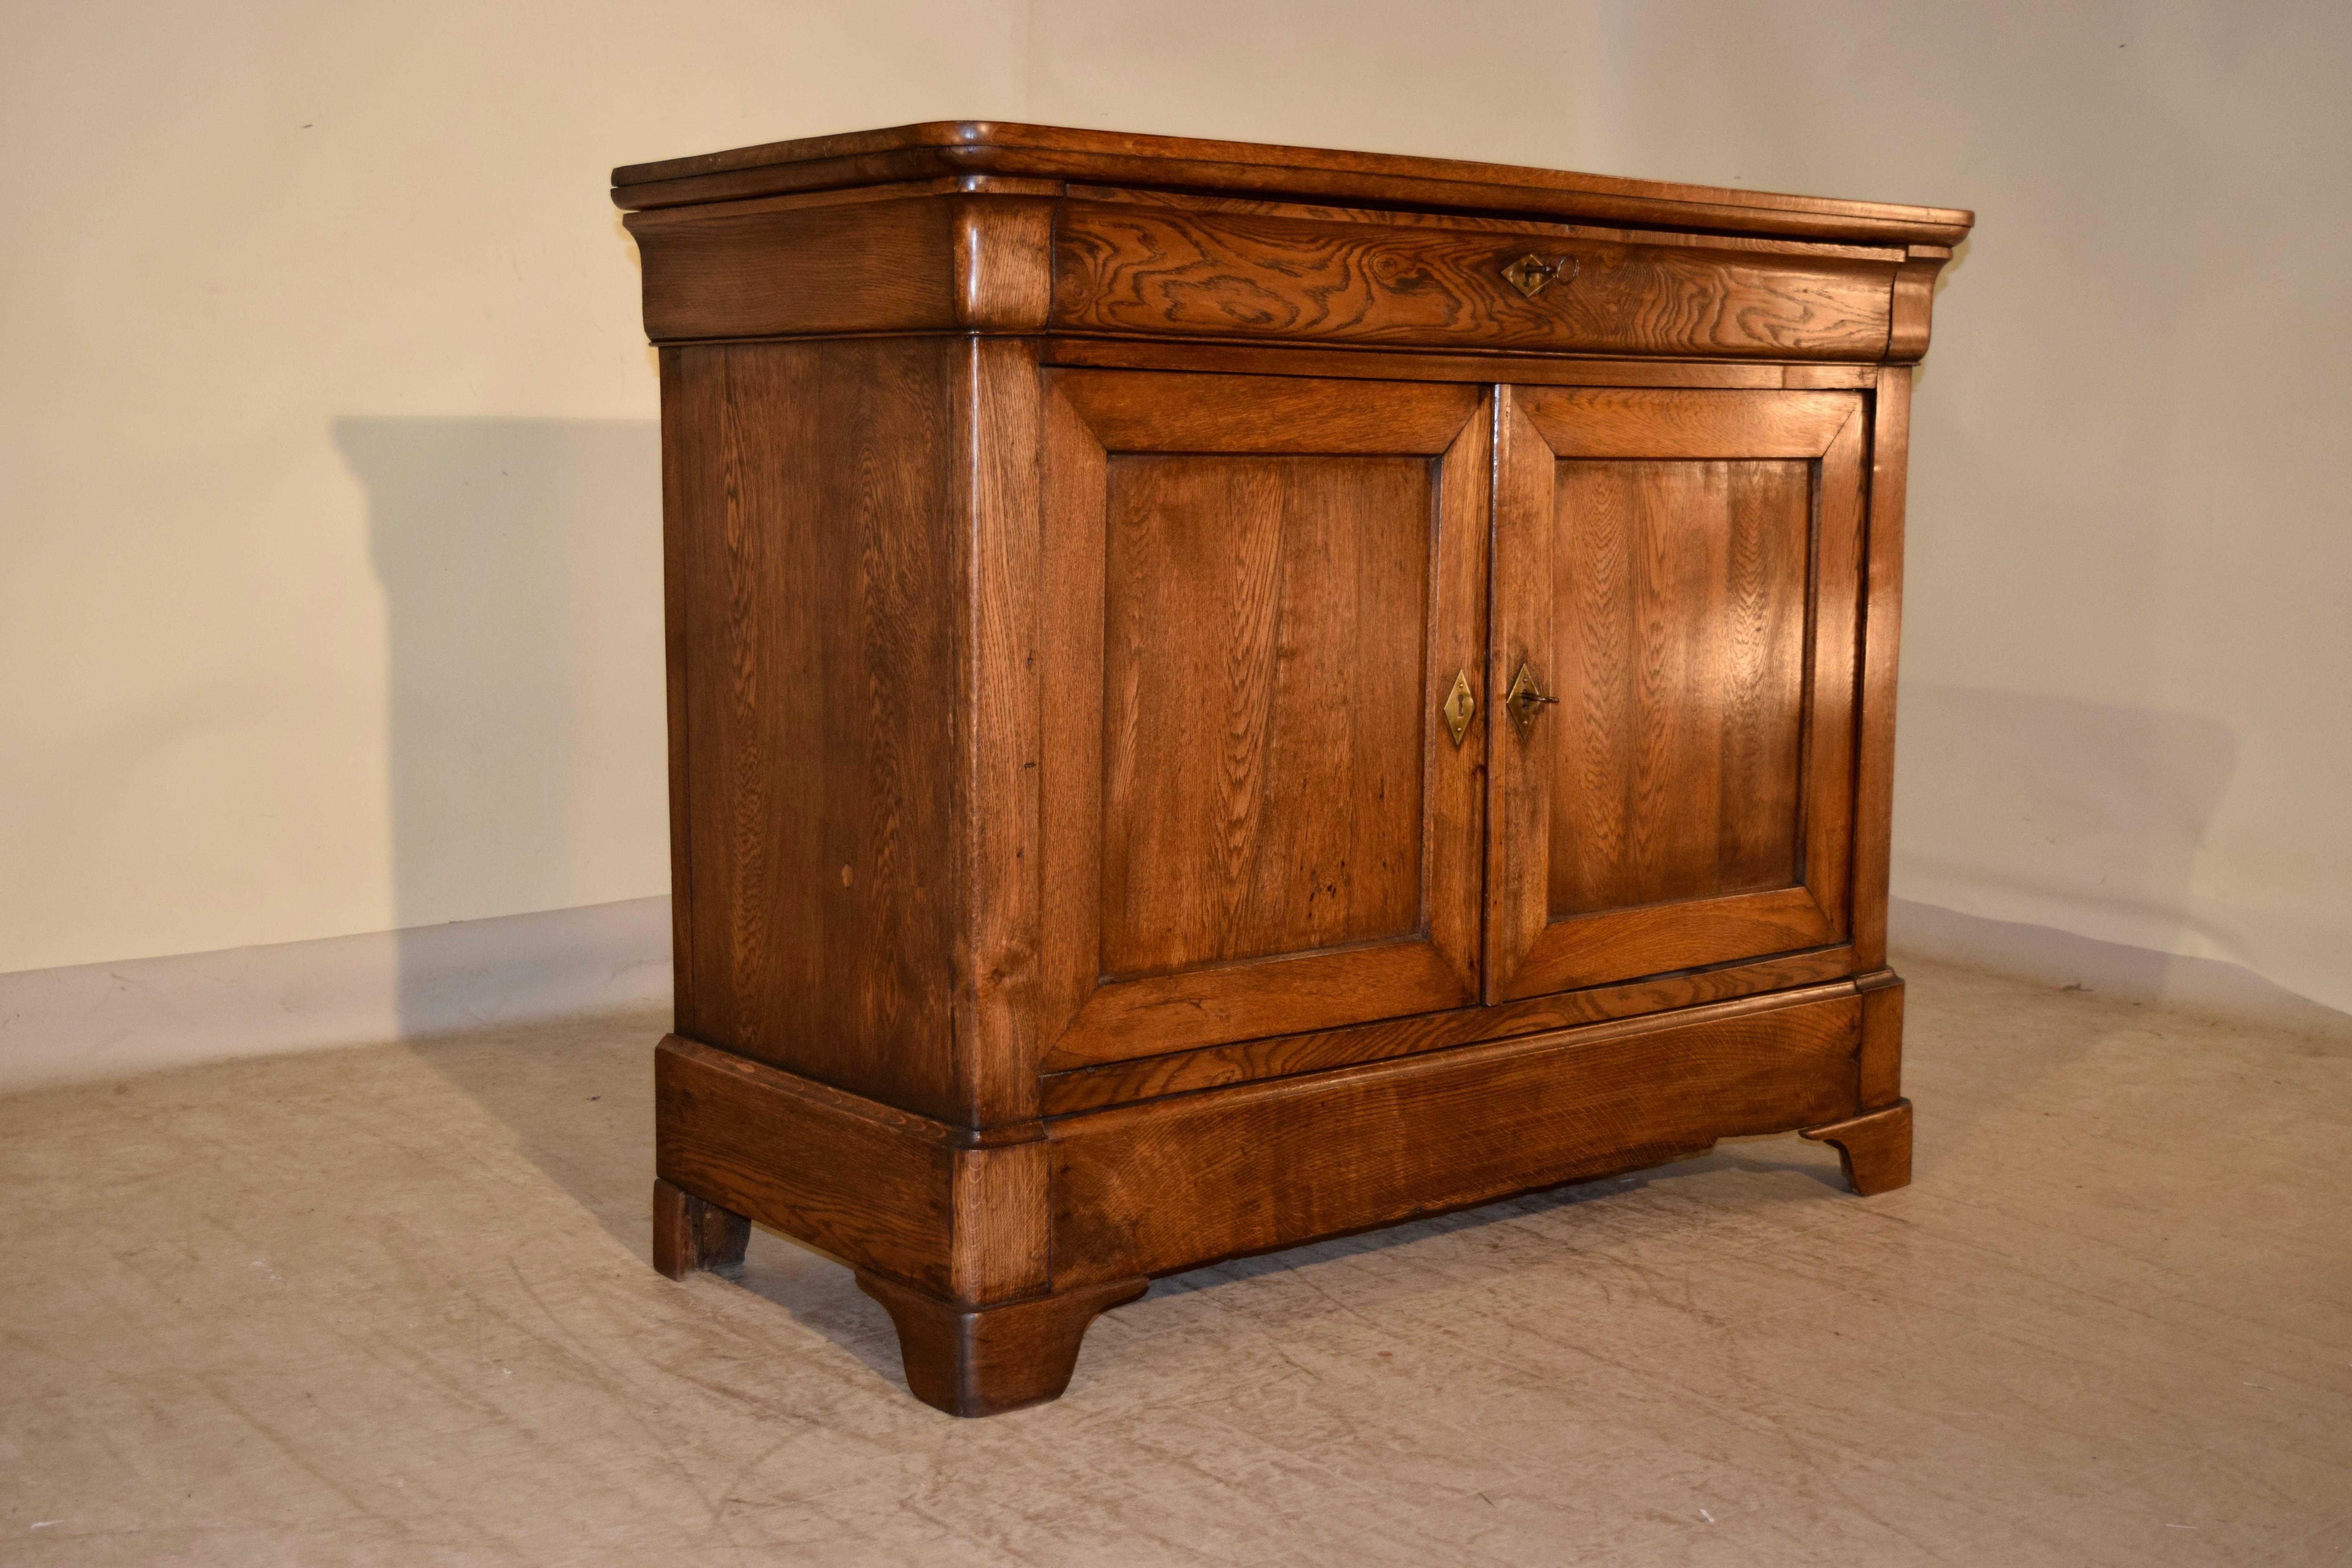 19th century Louis Philippe buffet from France made from oak and elm. The top is nicely grained and follows down to a single drawer which has an elm drawer front, over two paneled doors which open to reveal storage. The piece has simple sides and a